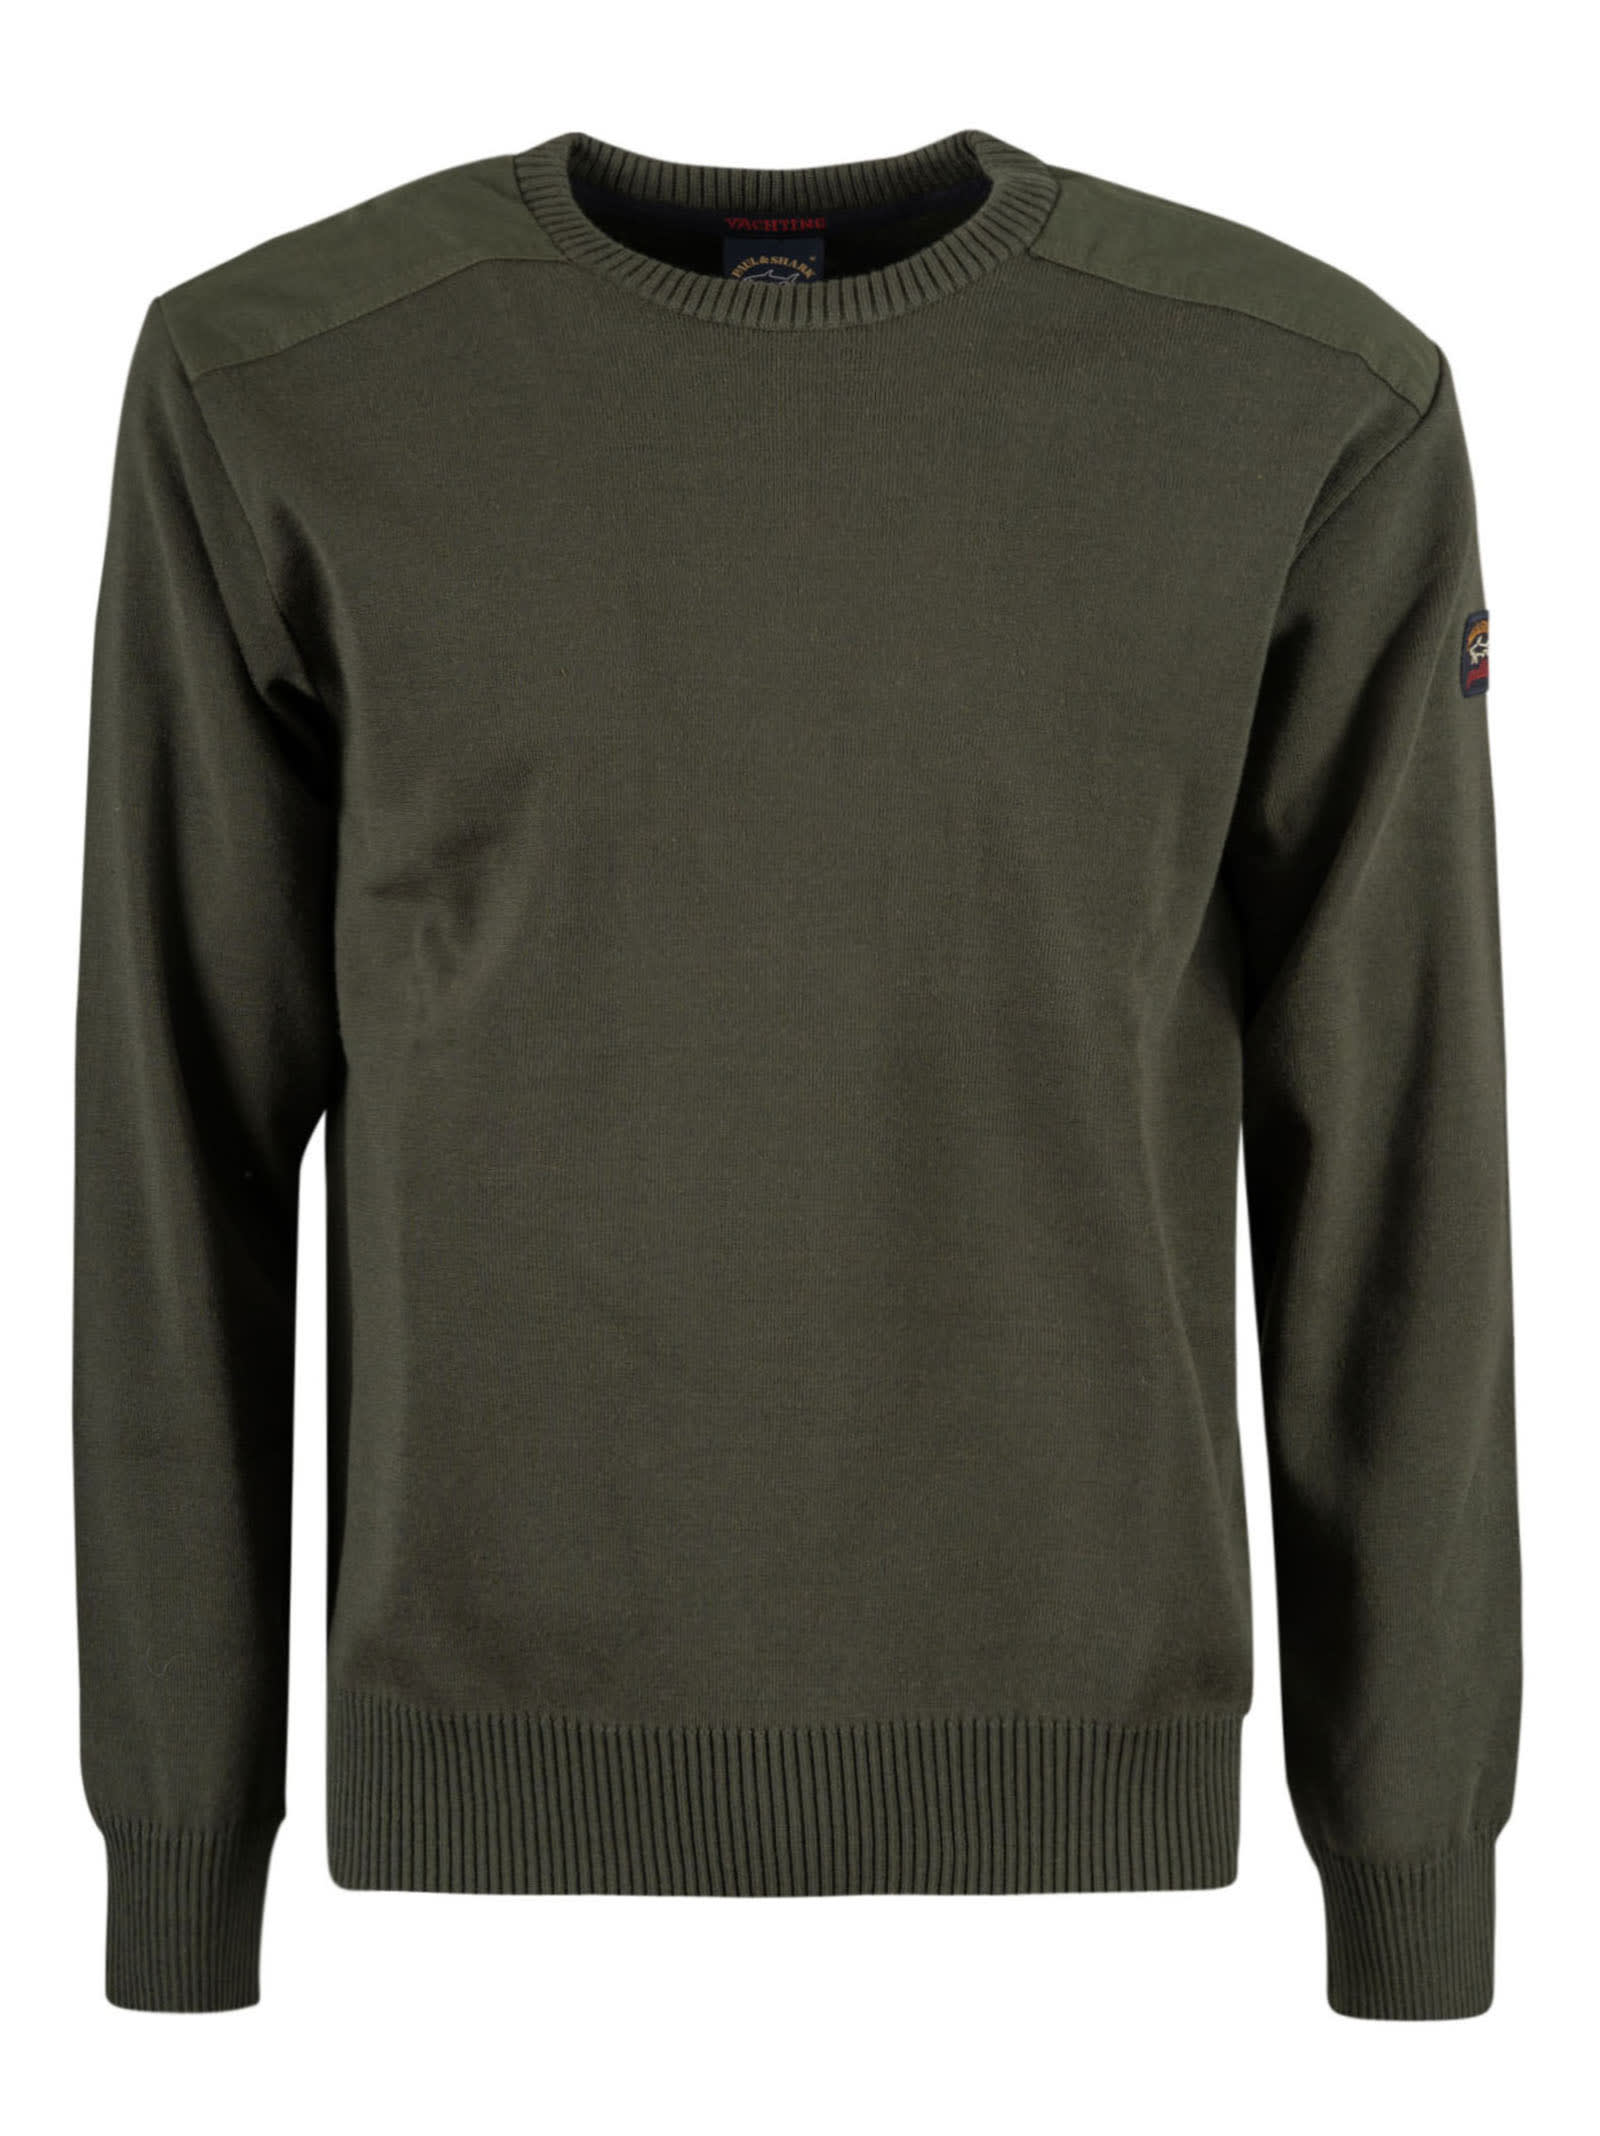 Paul&amp;shark Crewneck Logo Patched Sweater In Green